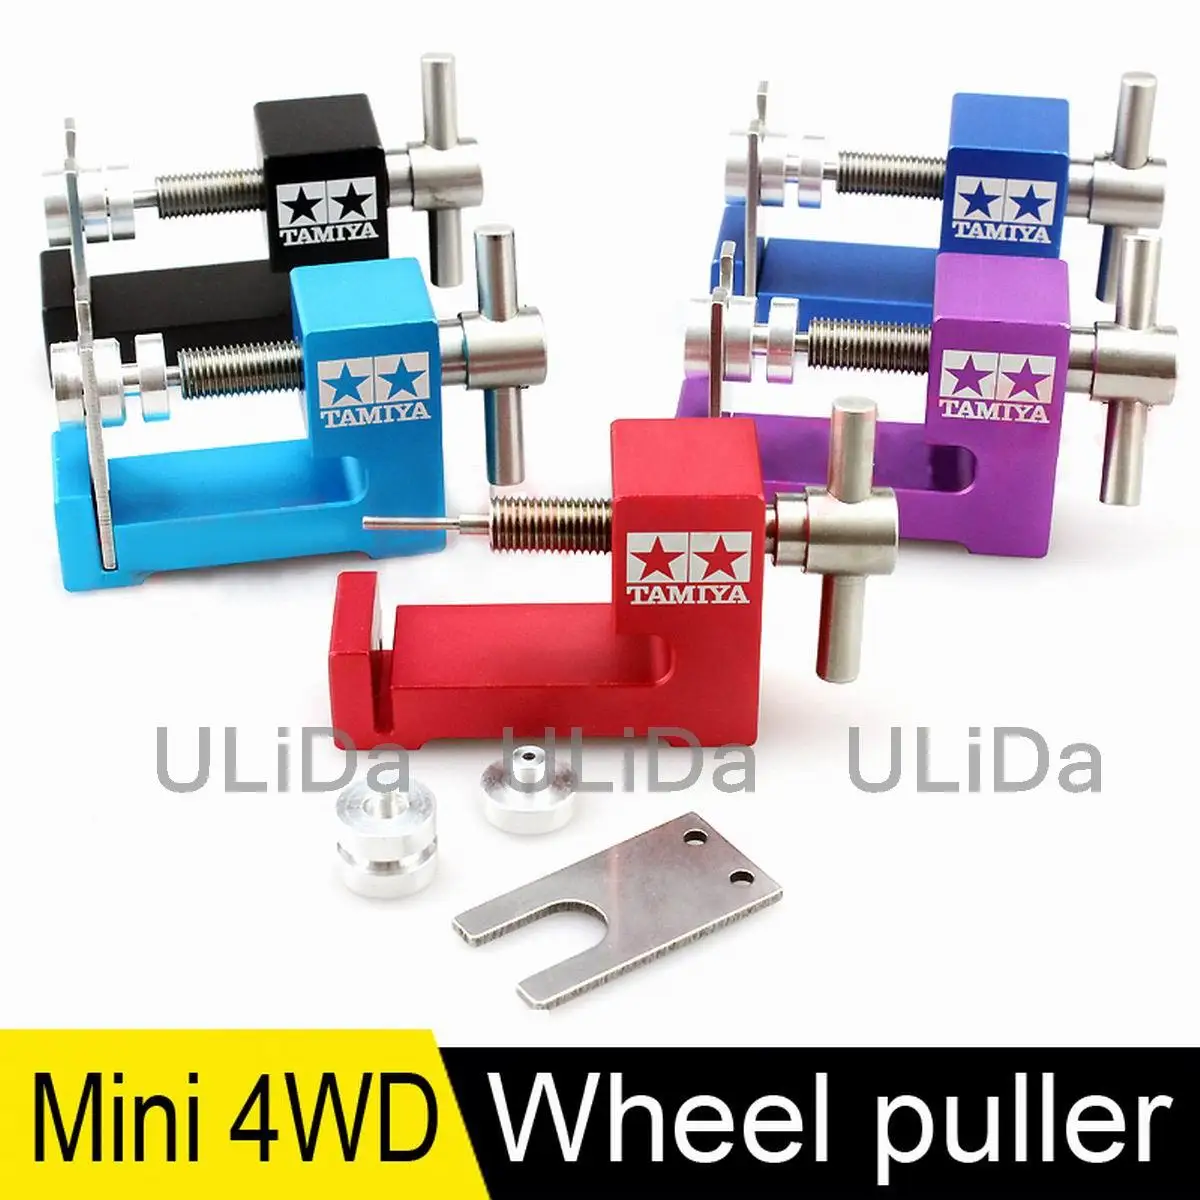 

Aluminum Alloy DIY Wheel Puller Tyre Remover Guide Roller Bearing Disassembler Tool Replacement Parts For RC Tamiya Mini 4WD Car